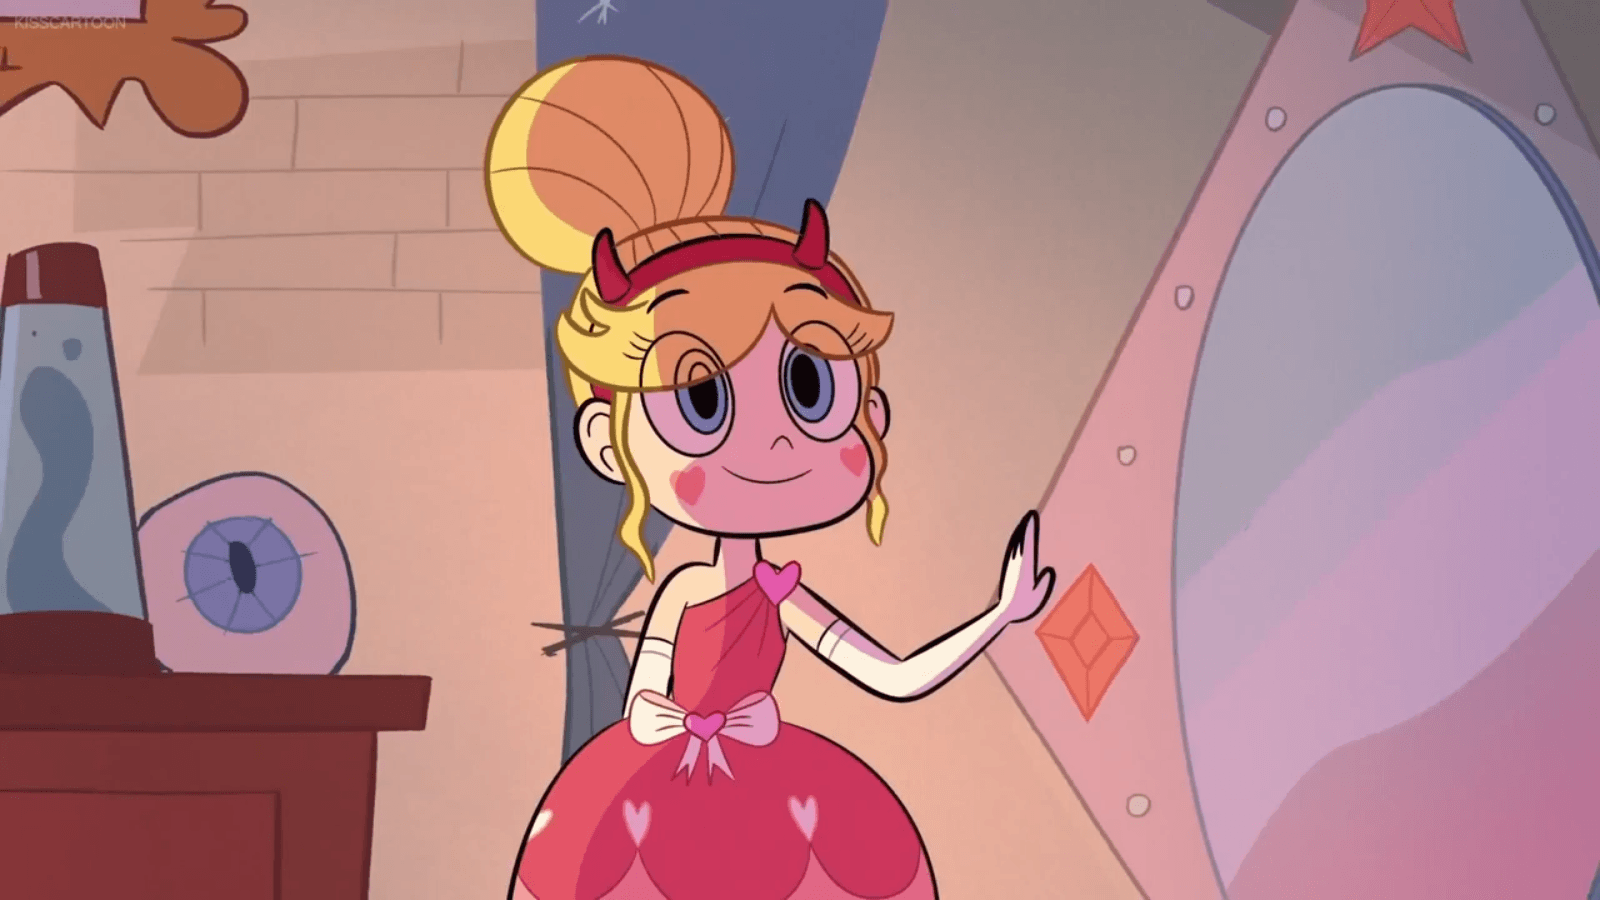 Star Vs. the Forces of Evil Wallpapers